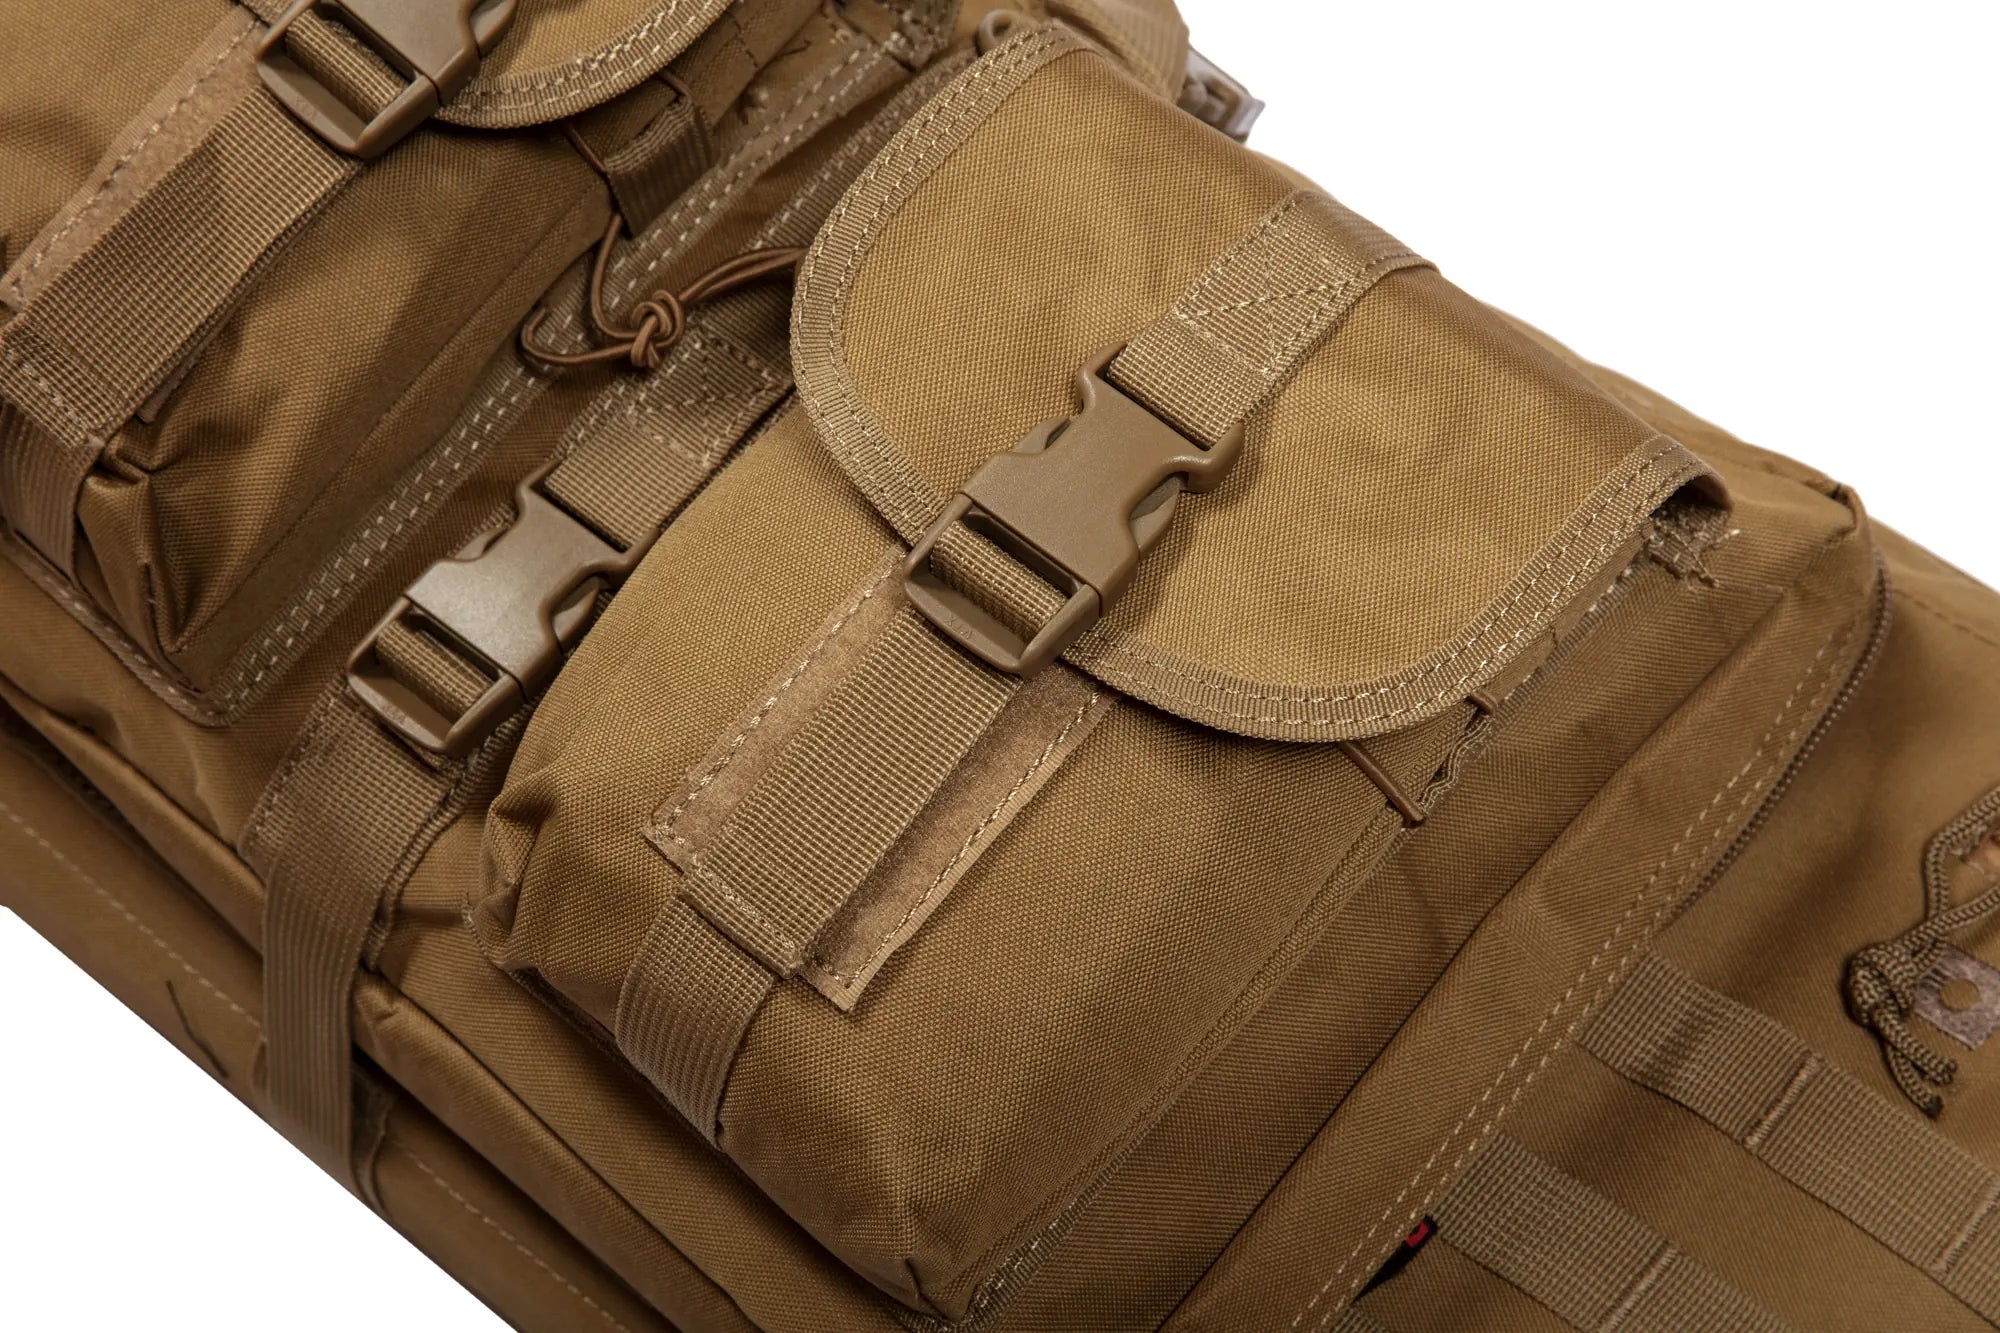 NP PMC Deluxe Soft Double Rifle Bag 42 - Tan"-3